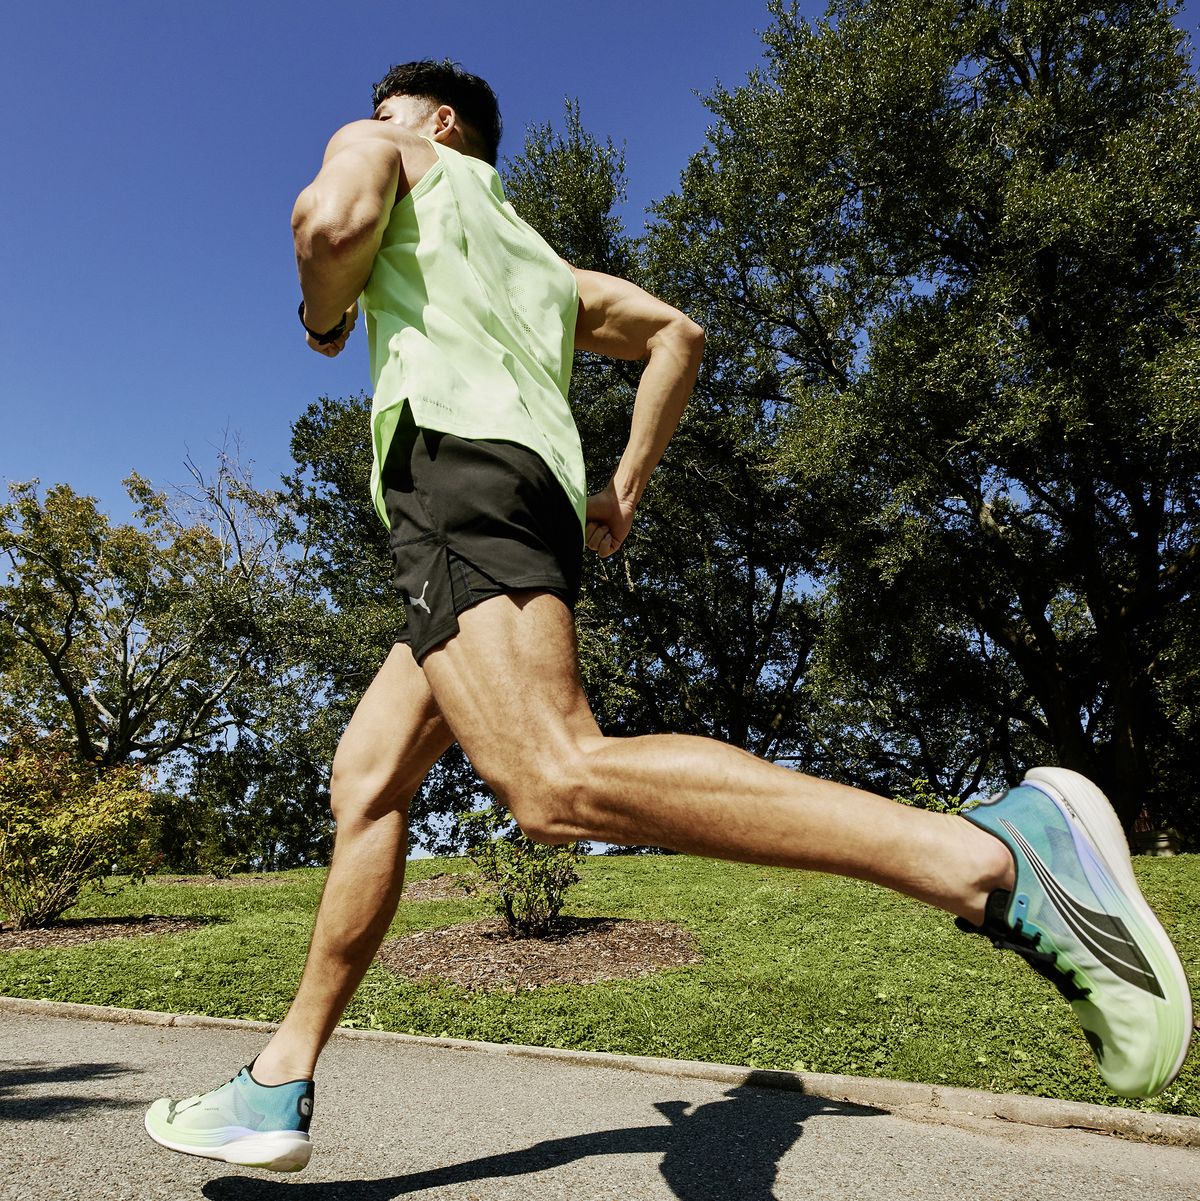 5 Simple Swaps For Your Best Run Yet